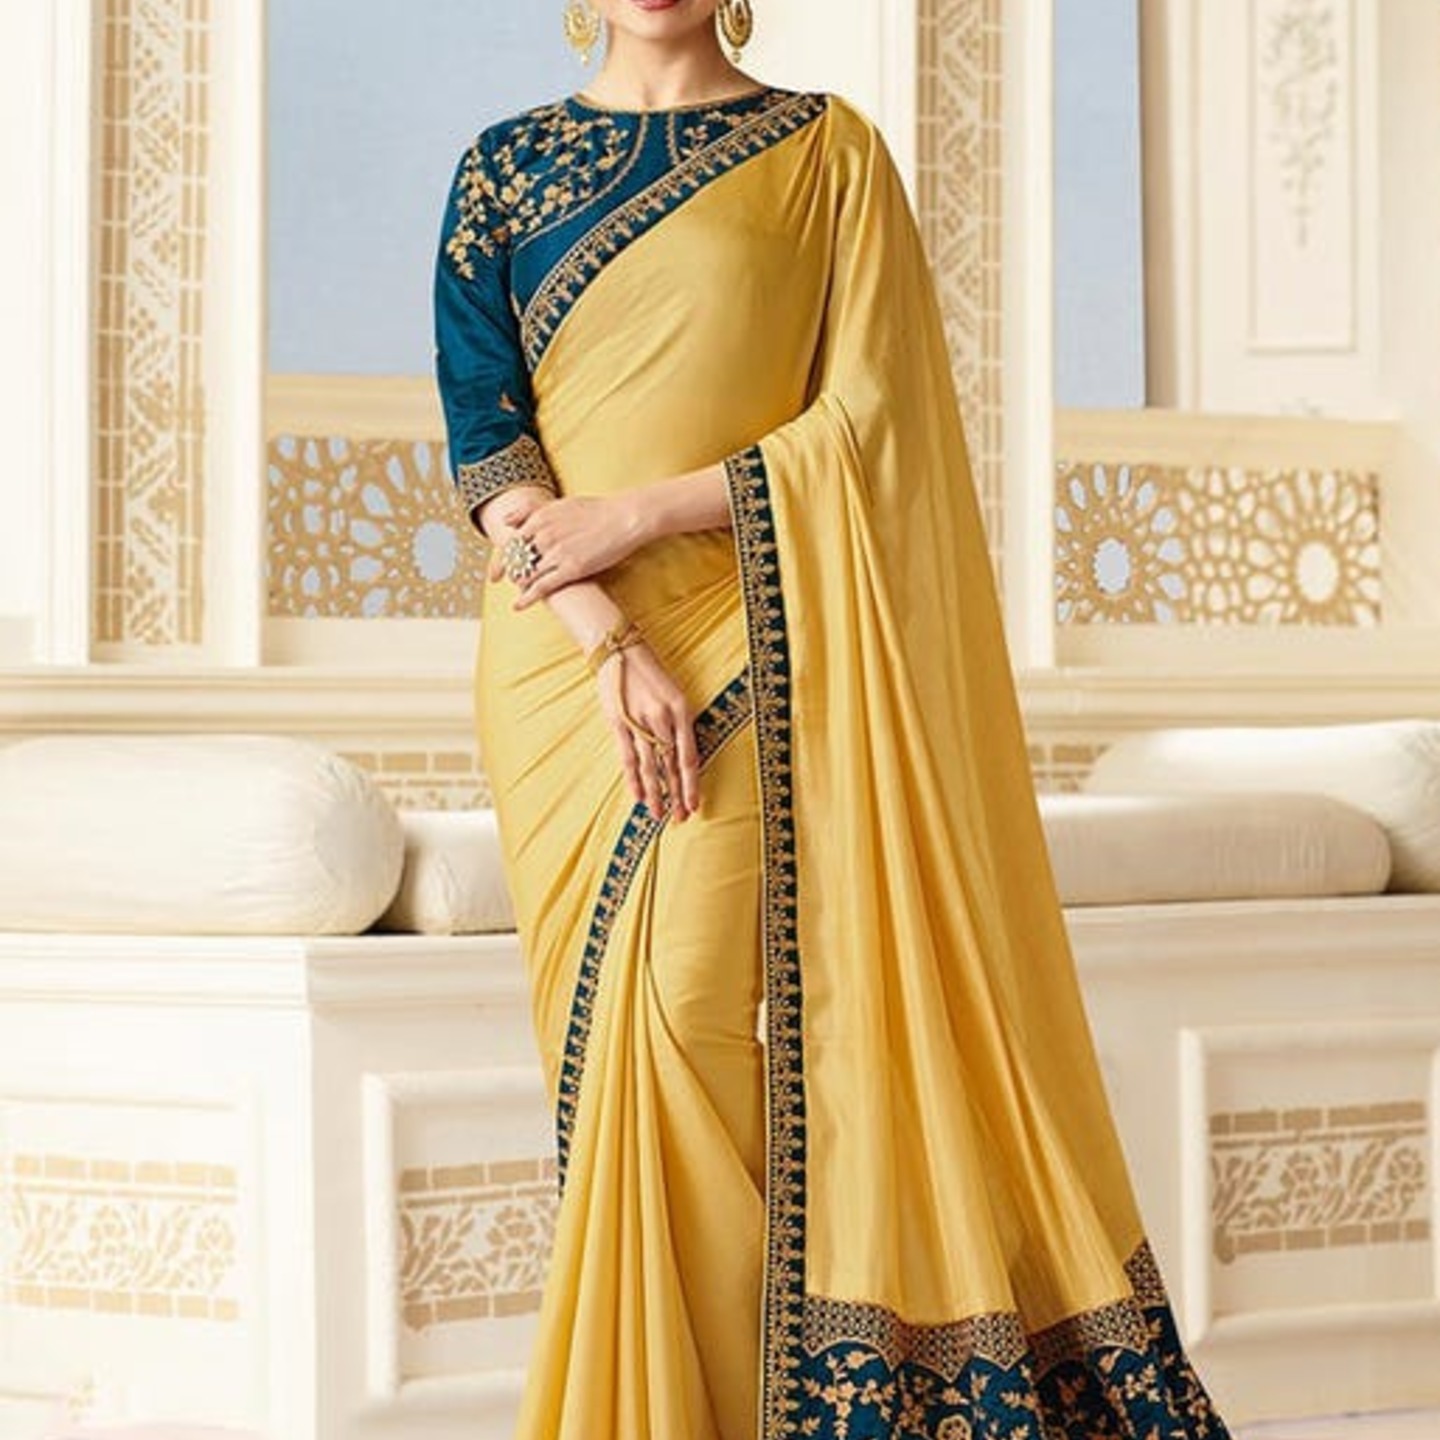 Robe Riche Yellow  Color Malai Silk) Embroidered With Lace Work Saree 